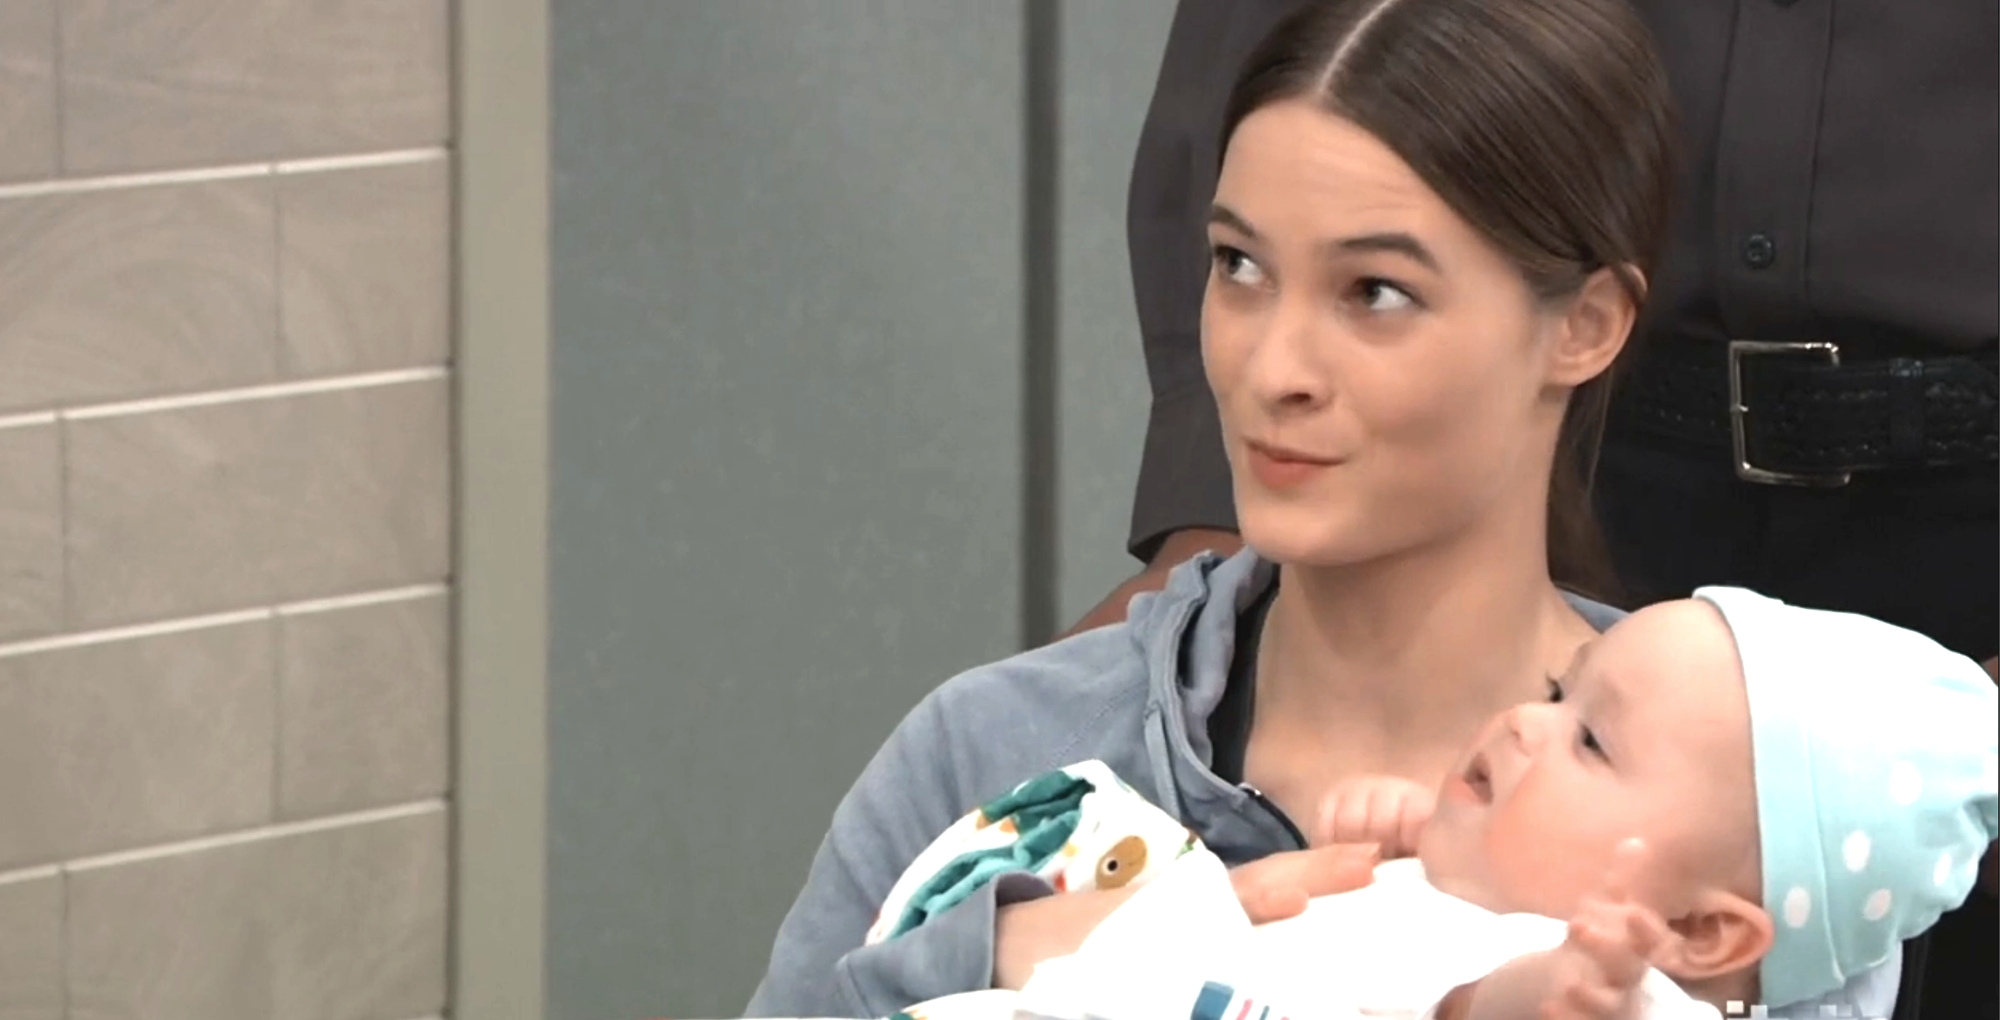 general hospital recap for march 8, 2023, has esme prince happy to take baby ace to prison